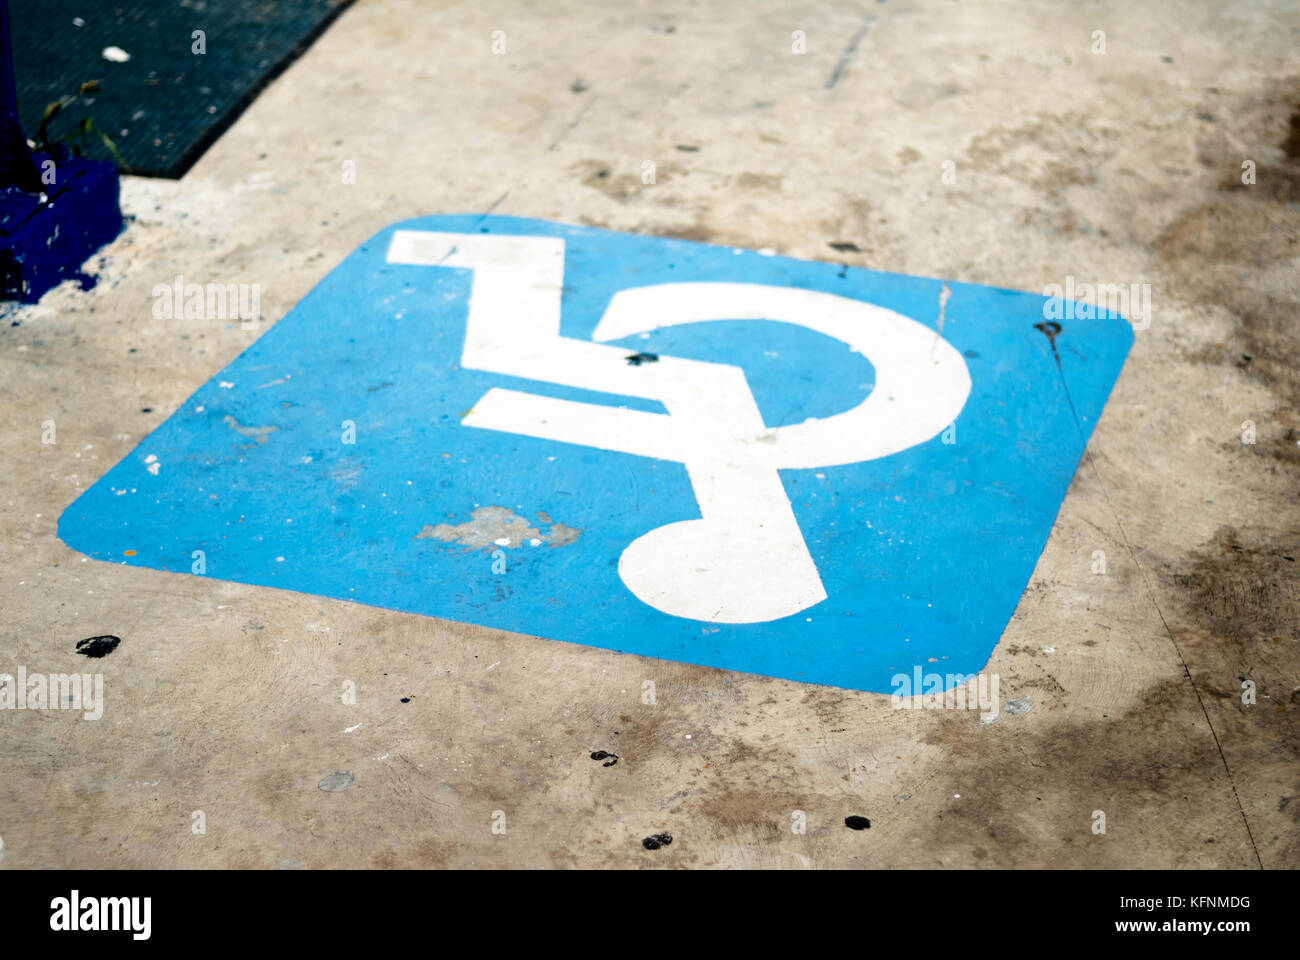 Empty parking space shows ISA symbol for wheelchair users and people with disabilities Stock Photo